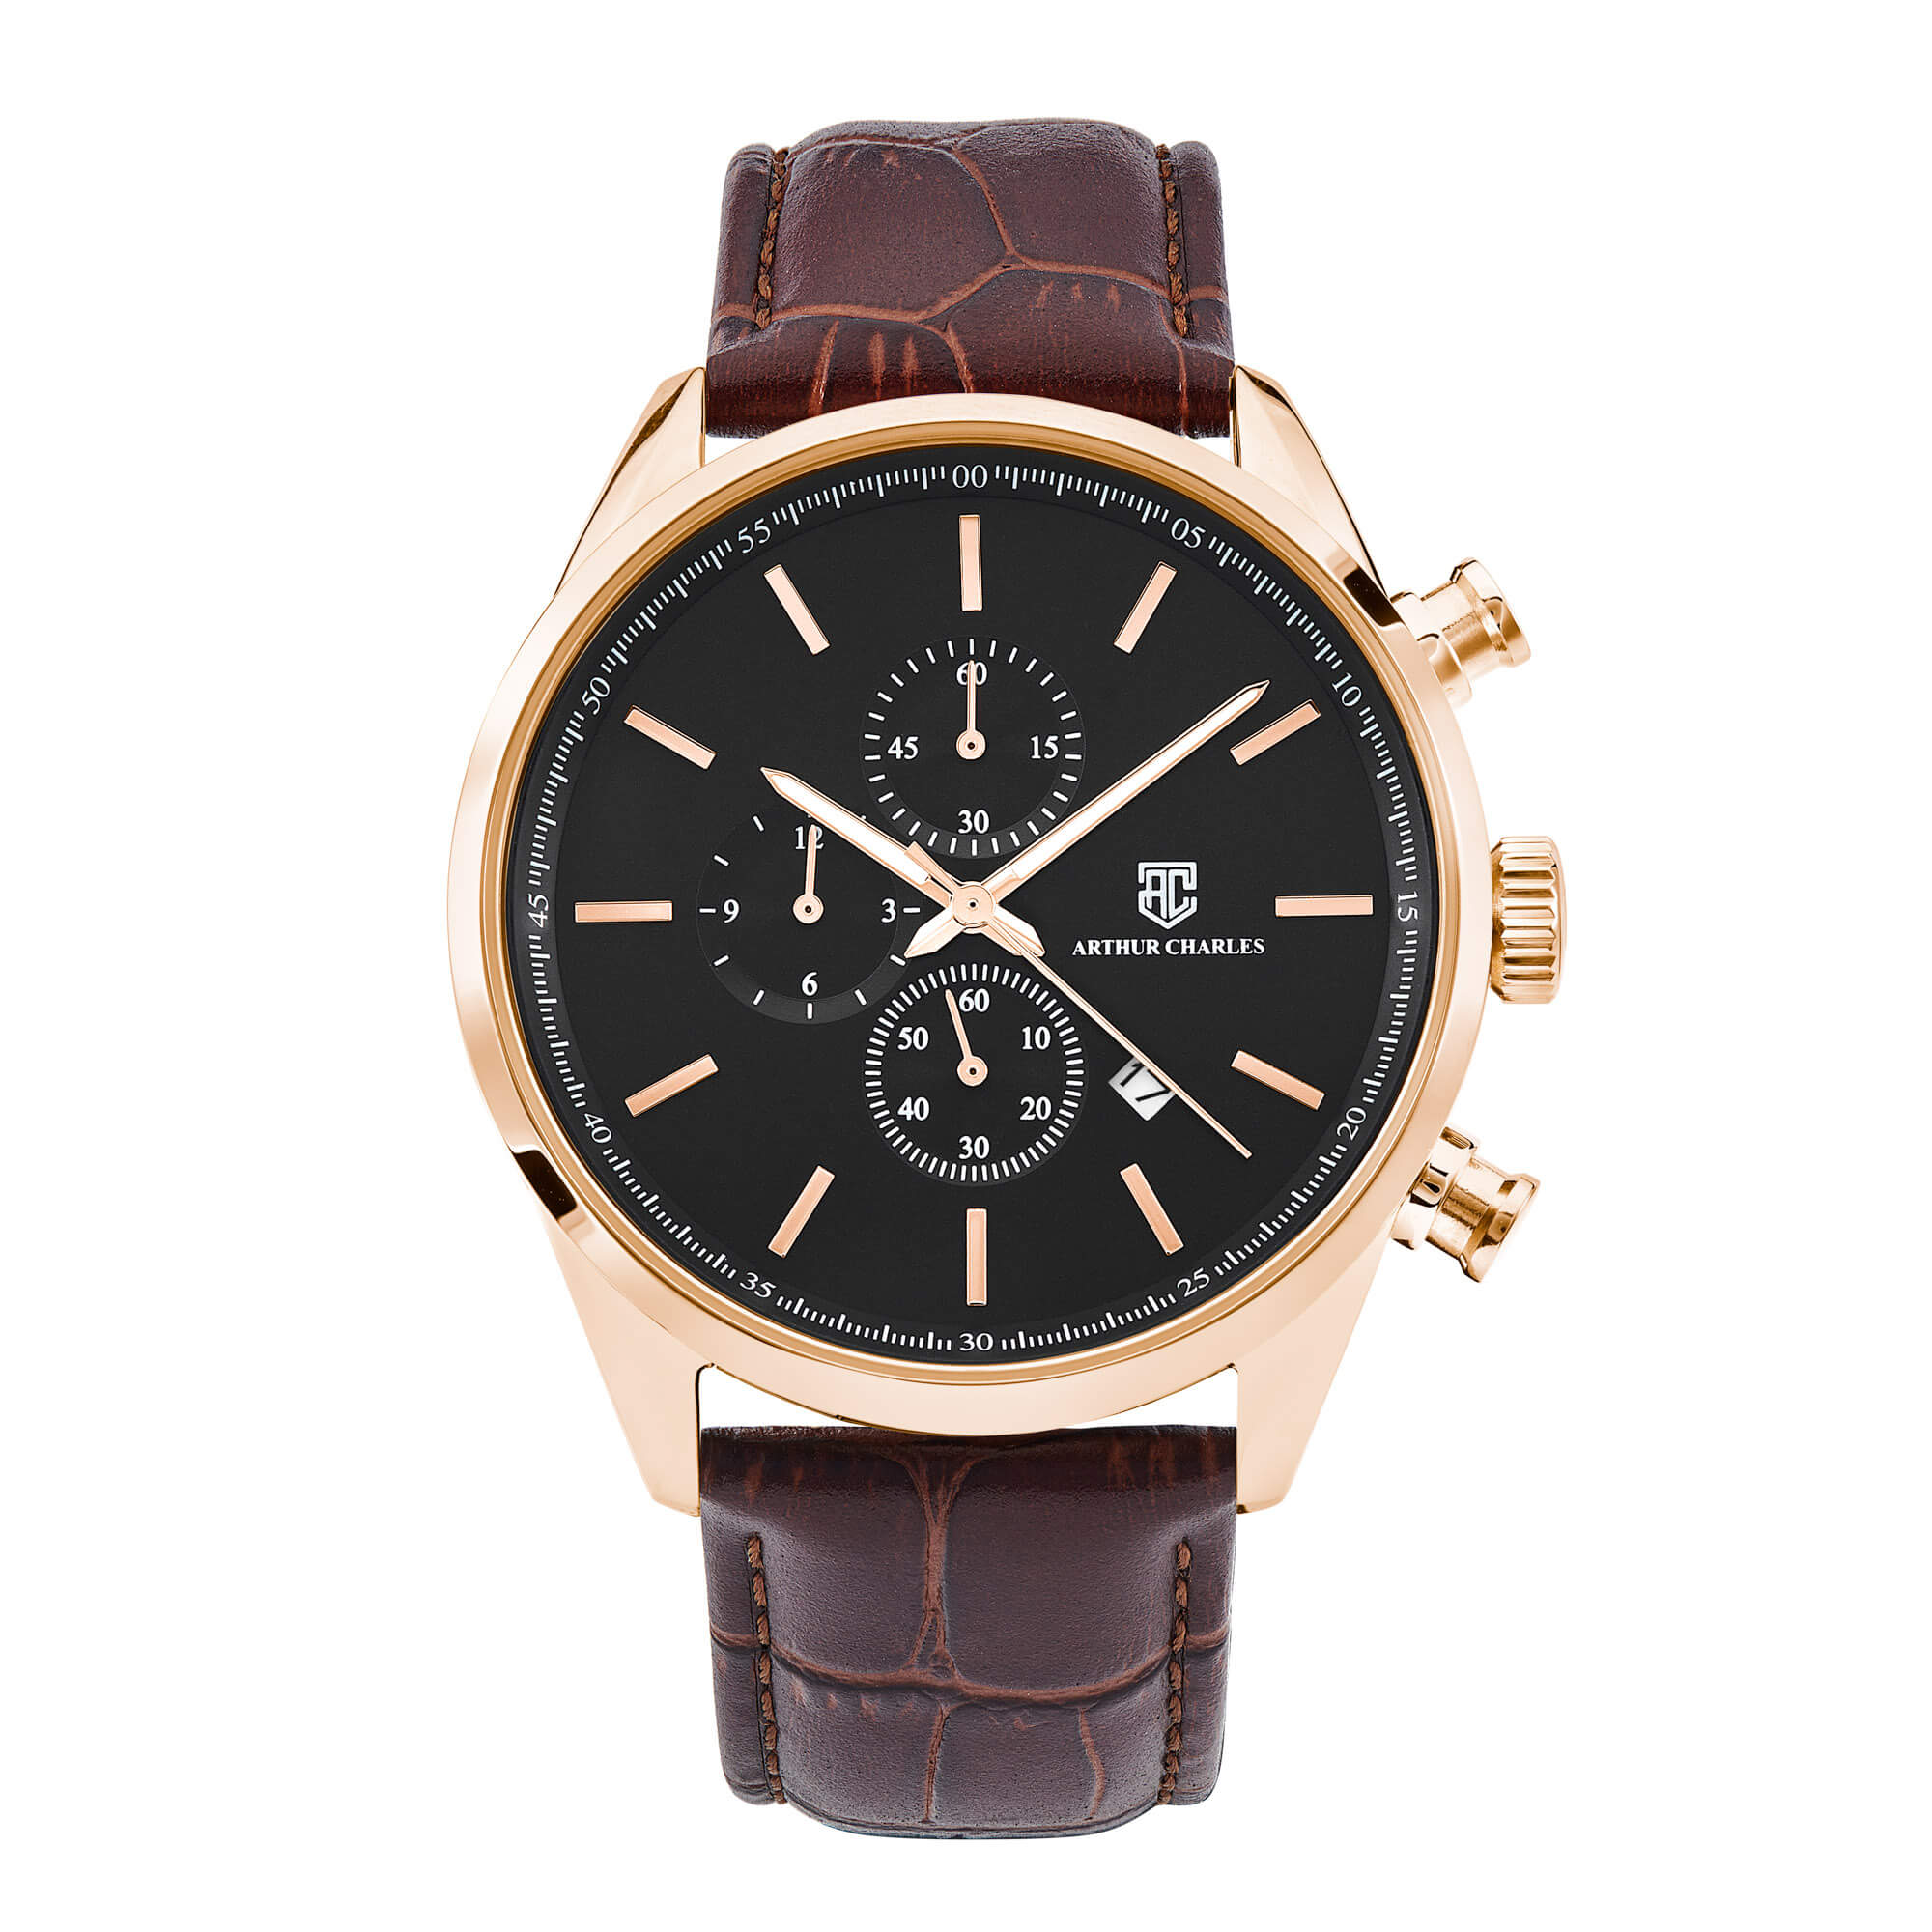 Front angle of the Men's Gold Chrono Prestige Watch by Arthur Charles. This watch has a gold case and gold dial with gold hands. Arthur Charles logo on the front of the watch and also on the crown of the watch. This watch is accompanied with a high quality genuine leather brown strap.